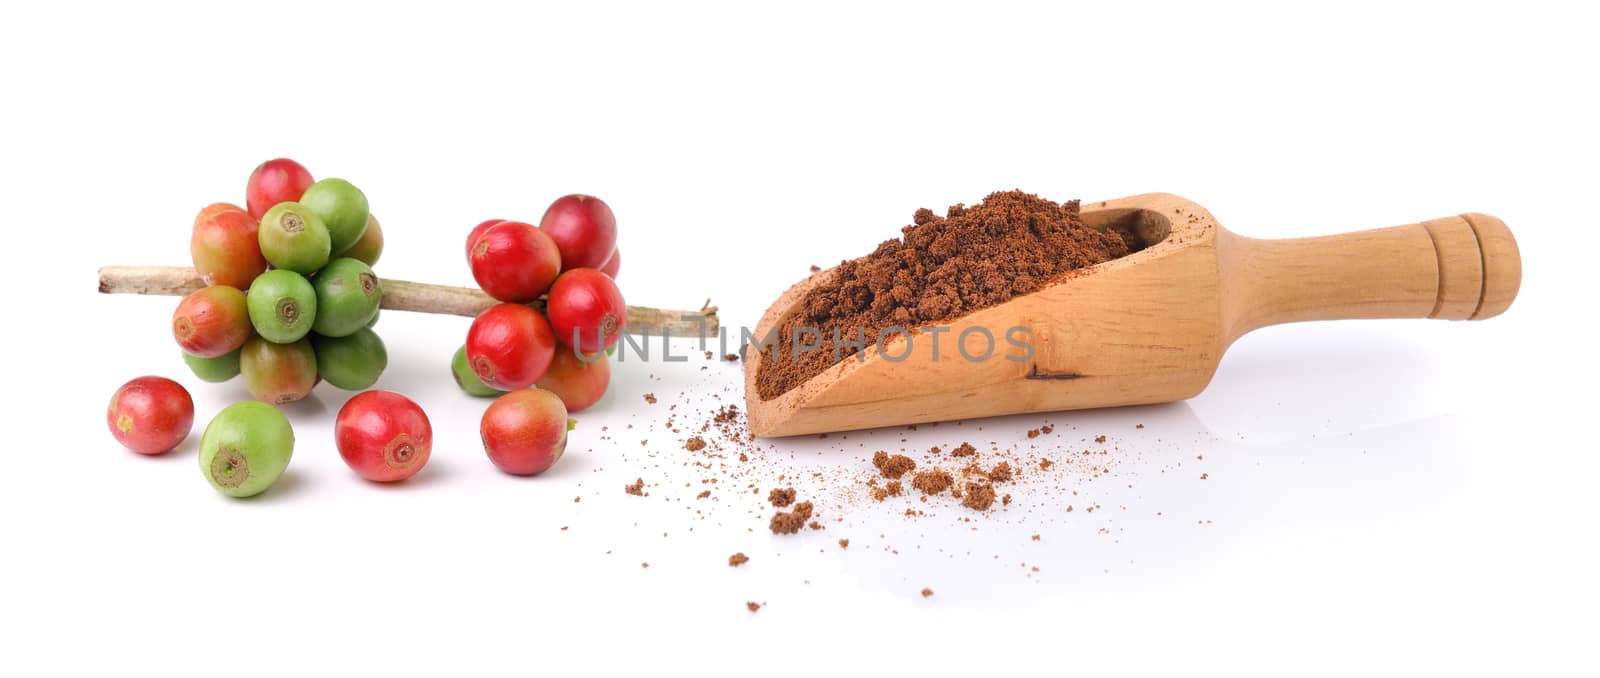 coffee beans and instant coffee in the scoop by sommai